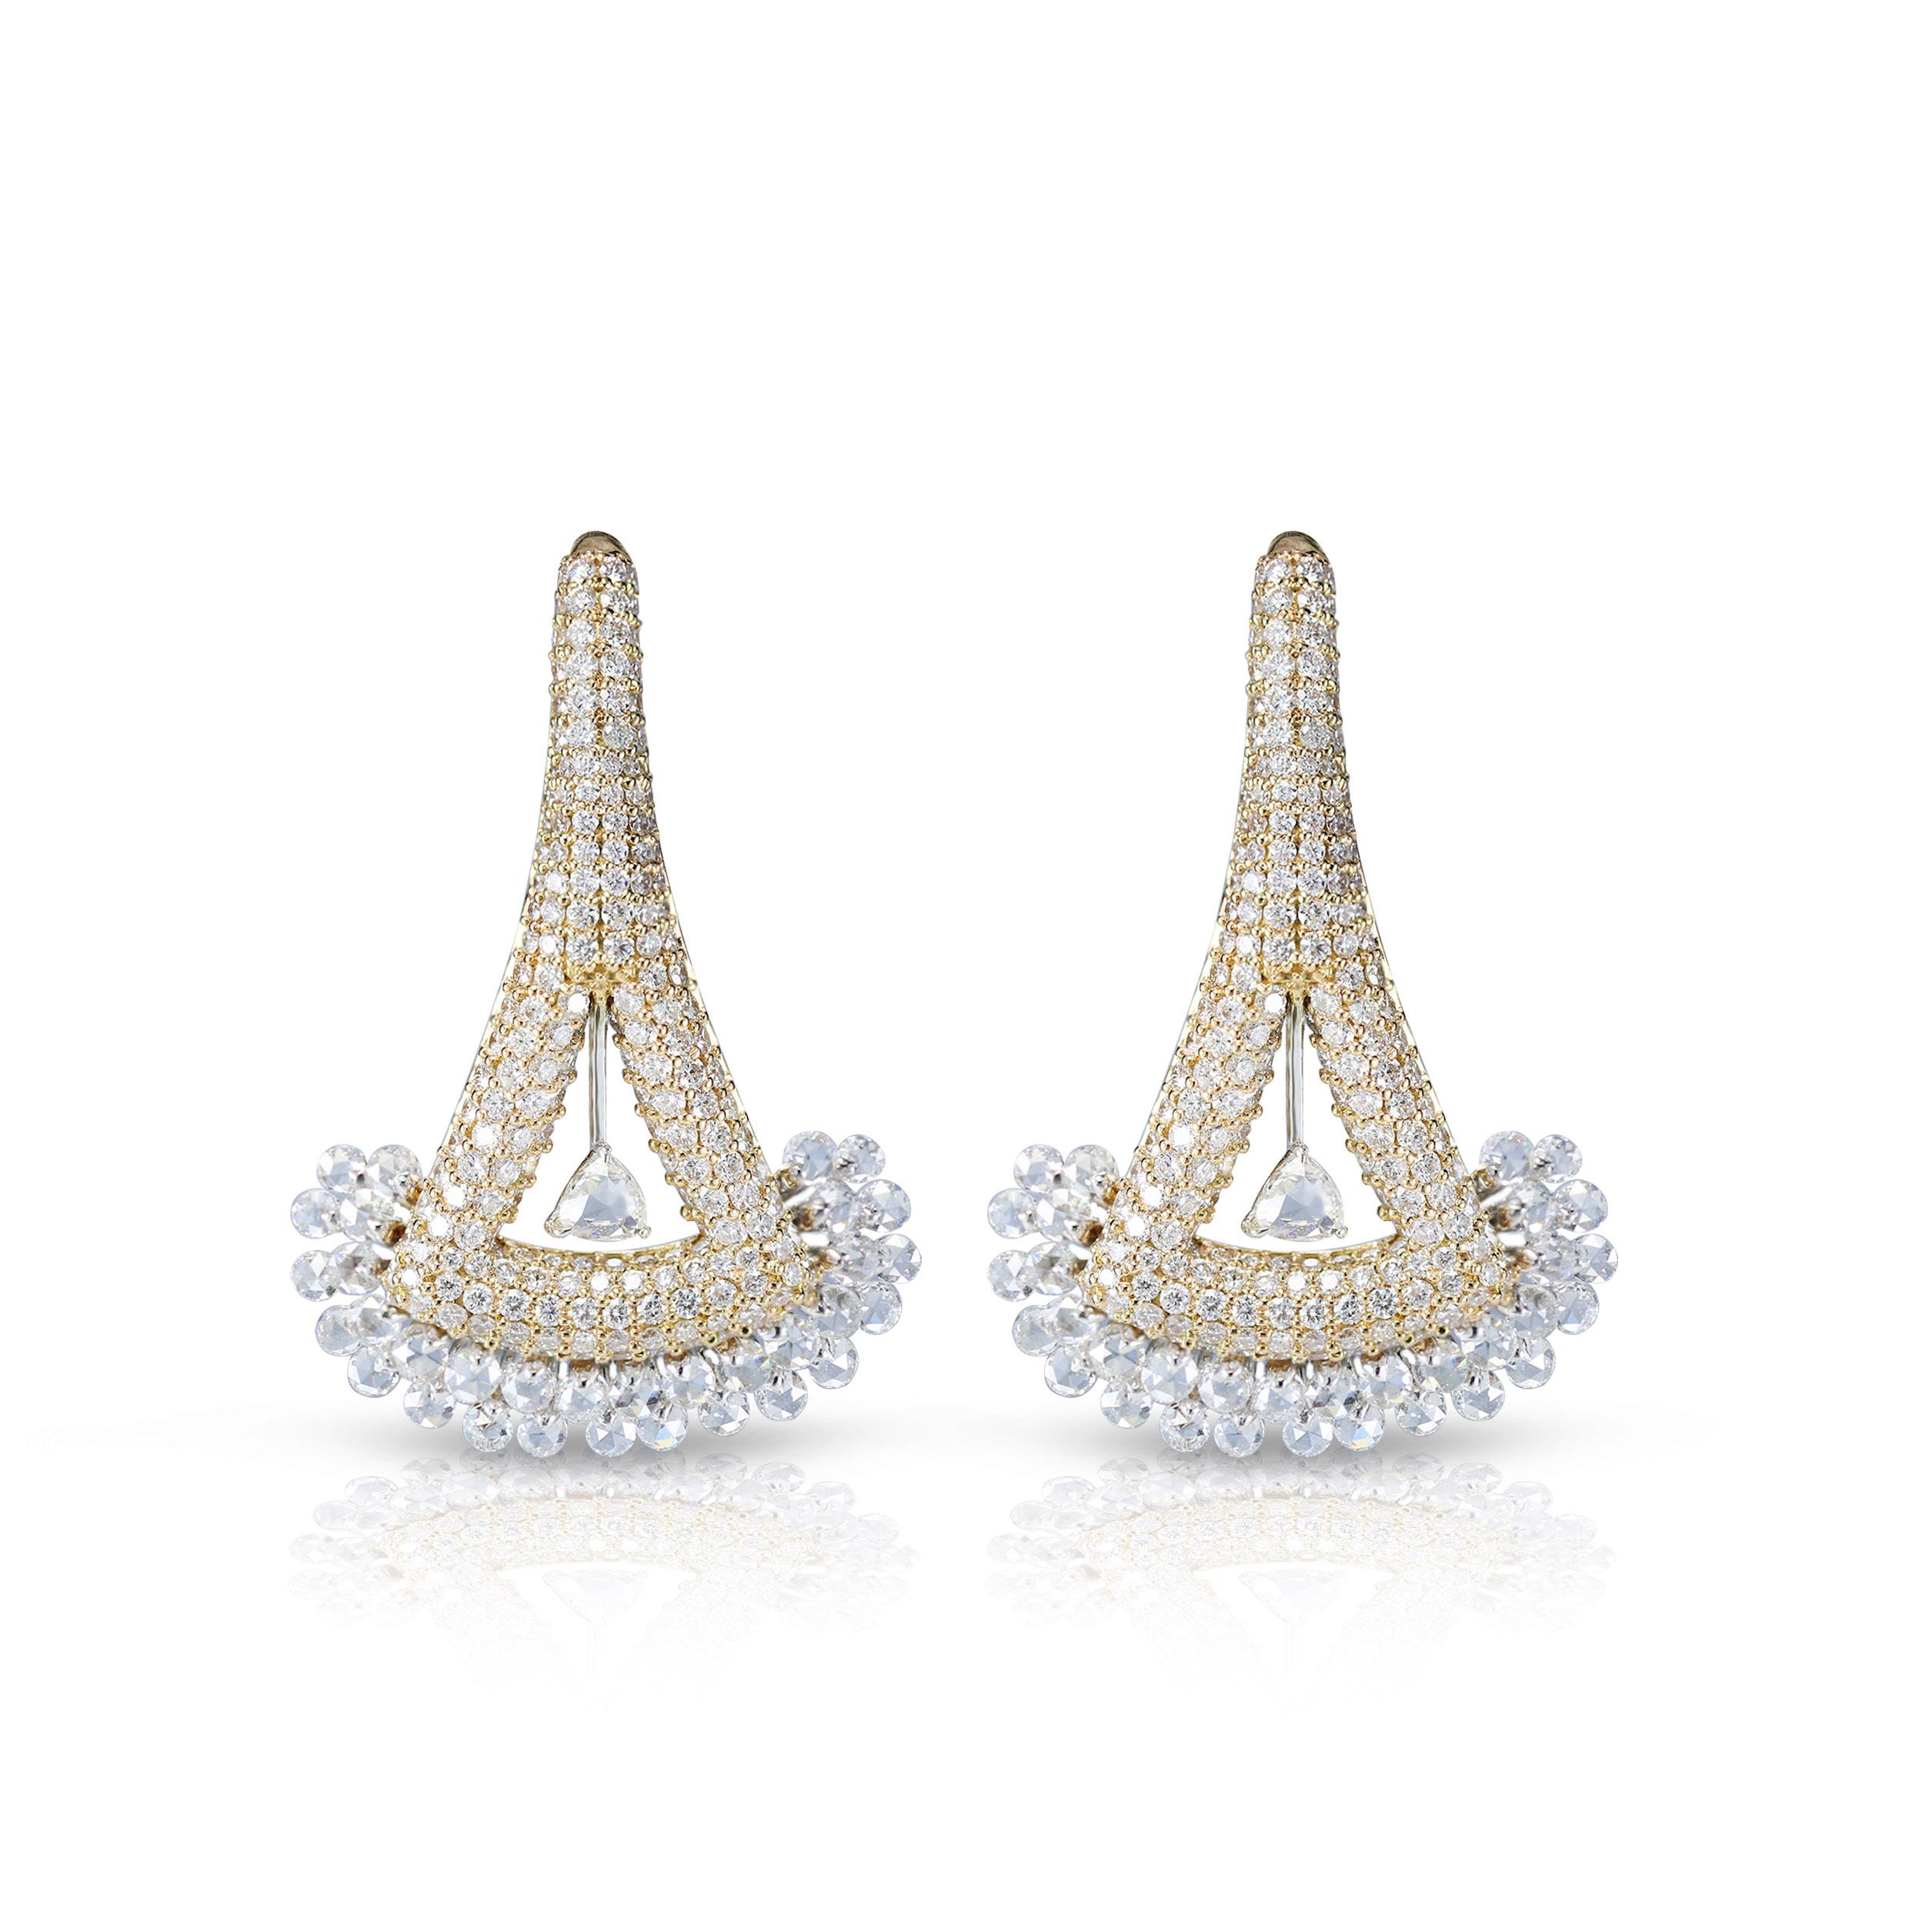 Trillion and Round Rose cut and Round Brilliant cut Earrings

A decidedly modern shape is carved with rounds and trillion rosecut and round brilliant cut diamonds set in 18K white and rose gold with a pave and drill setting creating a timeless pair